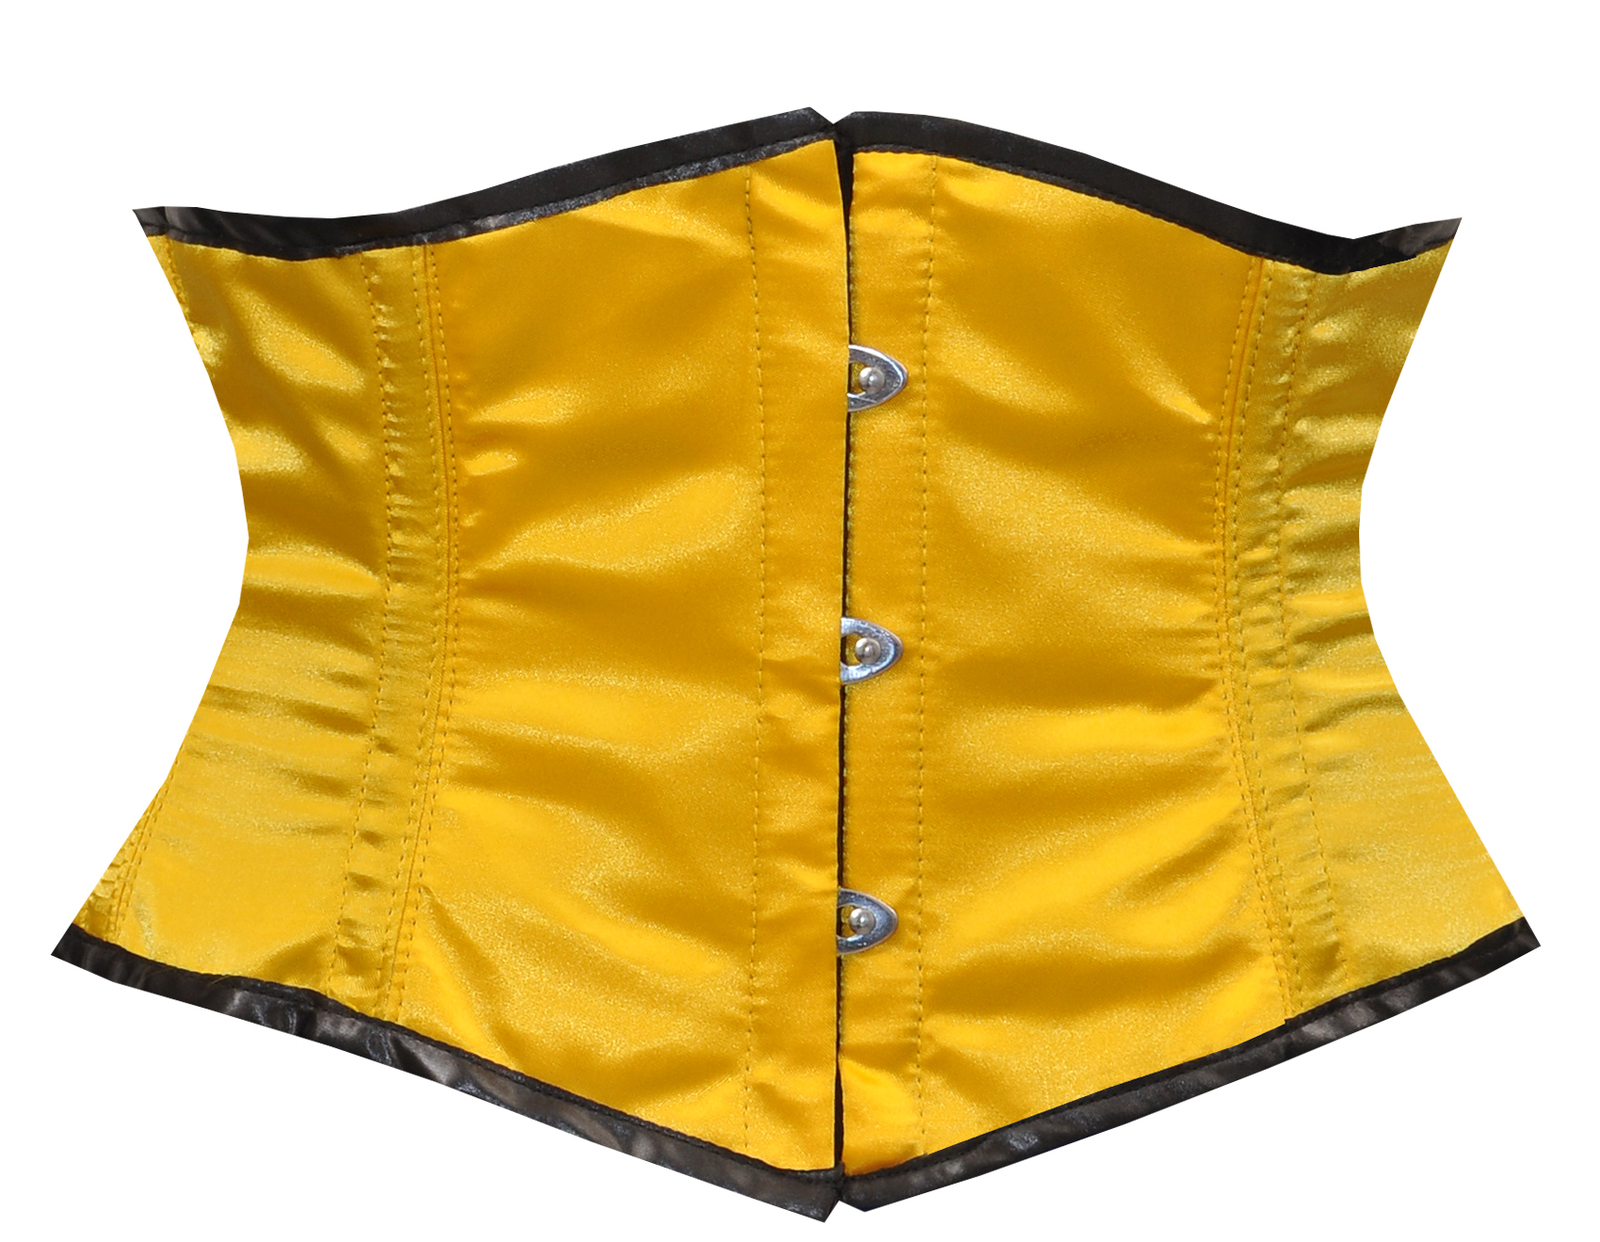 Primary image for Mini waspie full steel planer boned waistbust yellow satin sexy